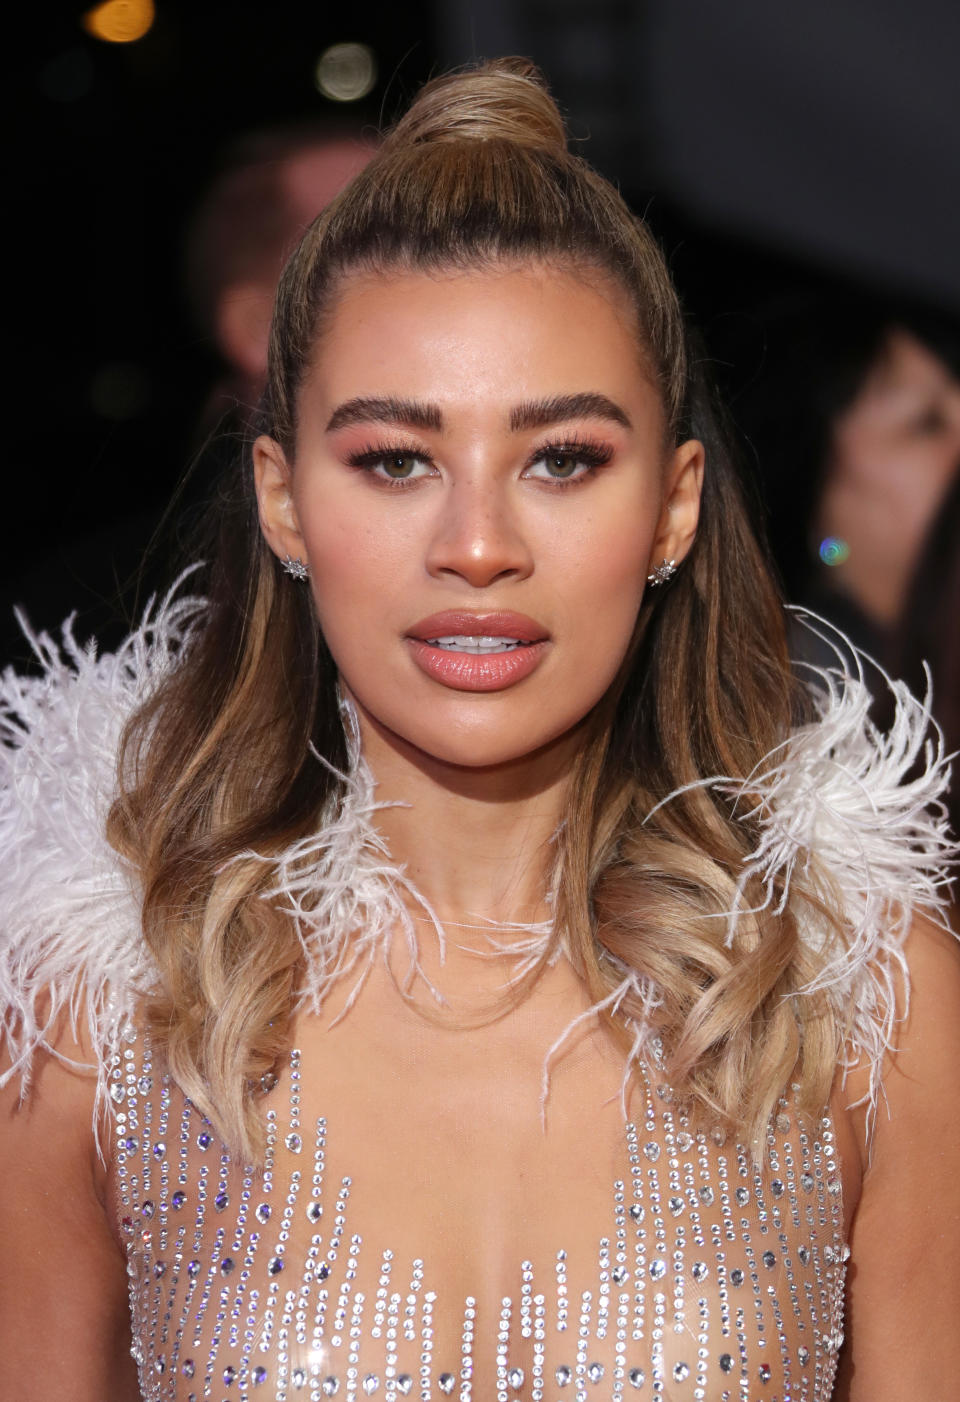 Montana Brown appeared on Love Island in 2017. (Photo by Mike Marsland/WireImage)